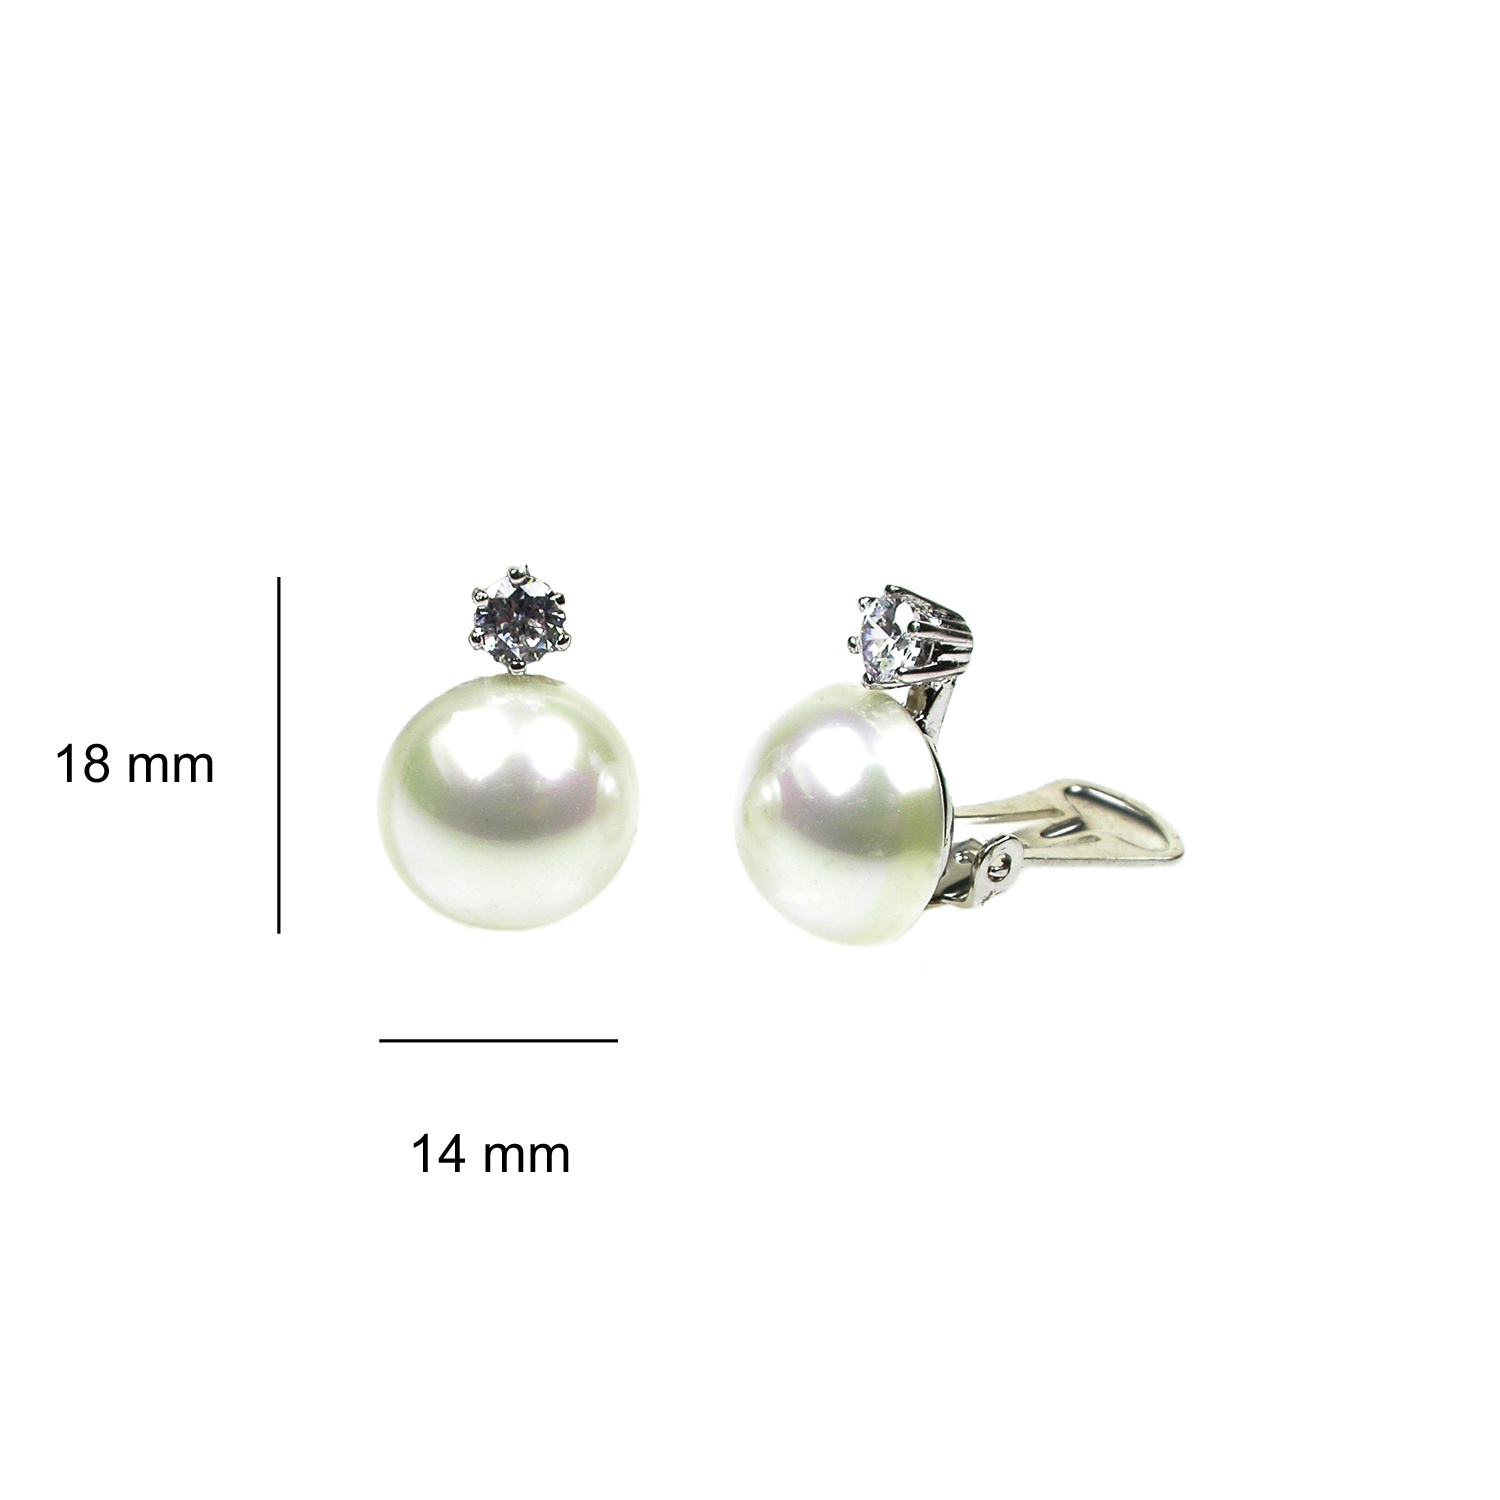 Cabouchon Pearl and Zirconia Clip Earrings in Sterling Silver 3